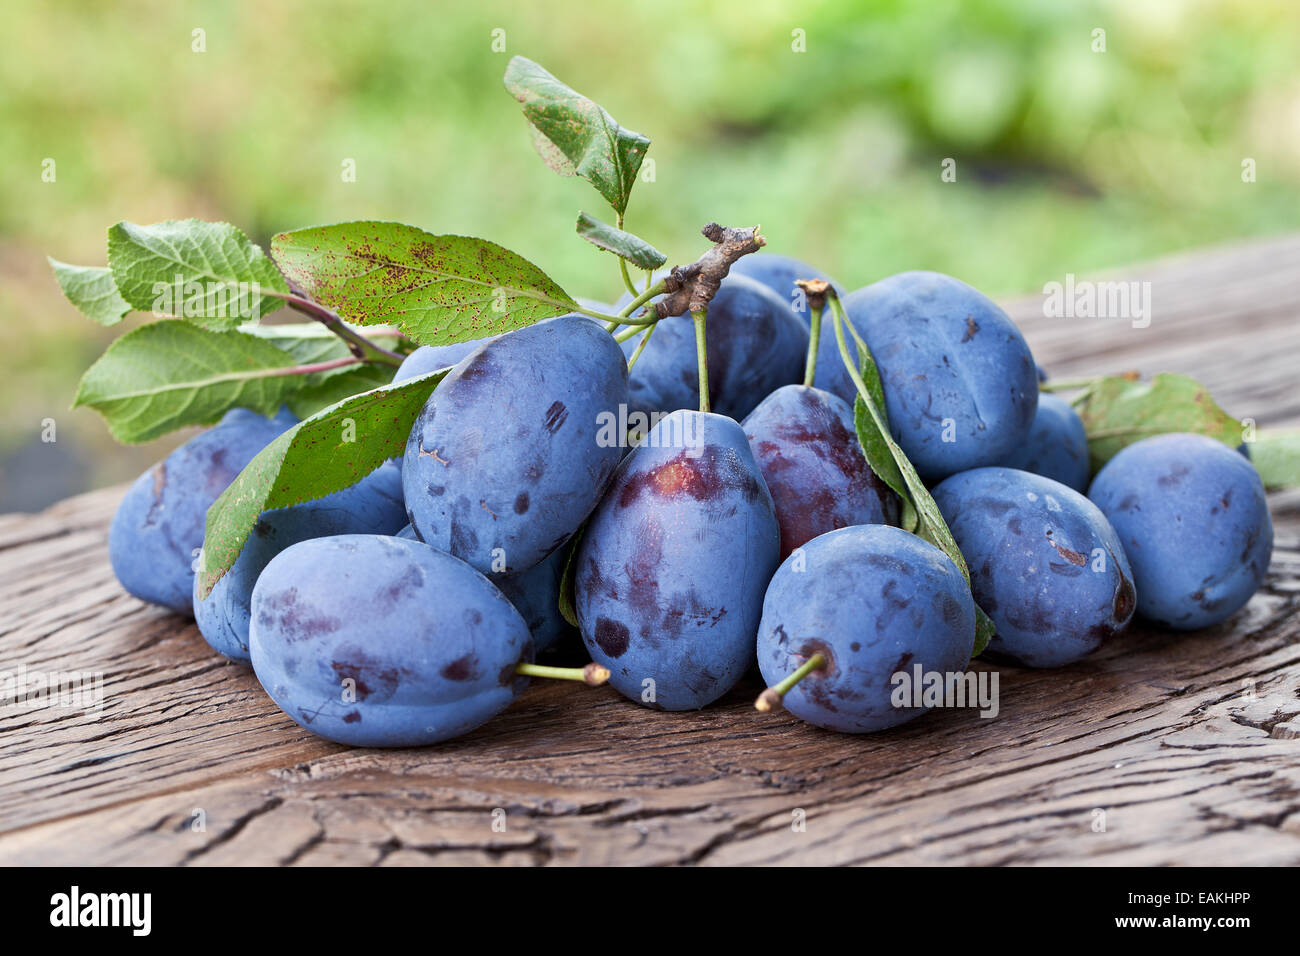 Plums on an old wooden table in the garden. Stock Photo